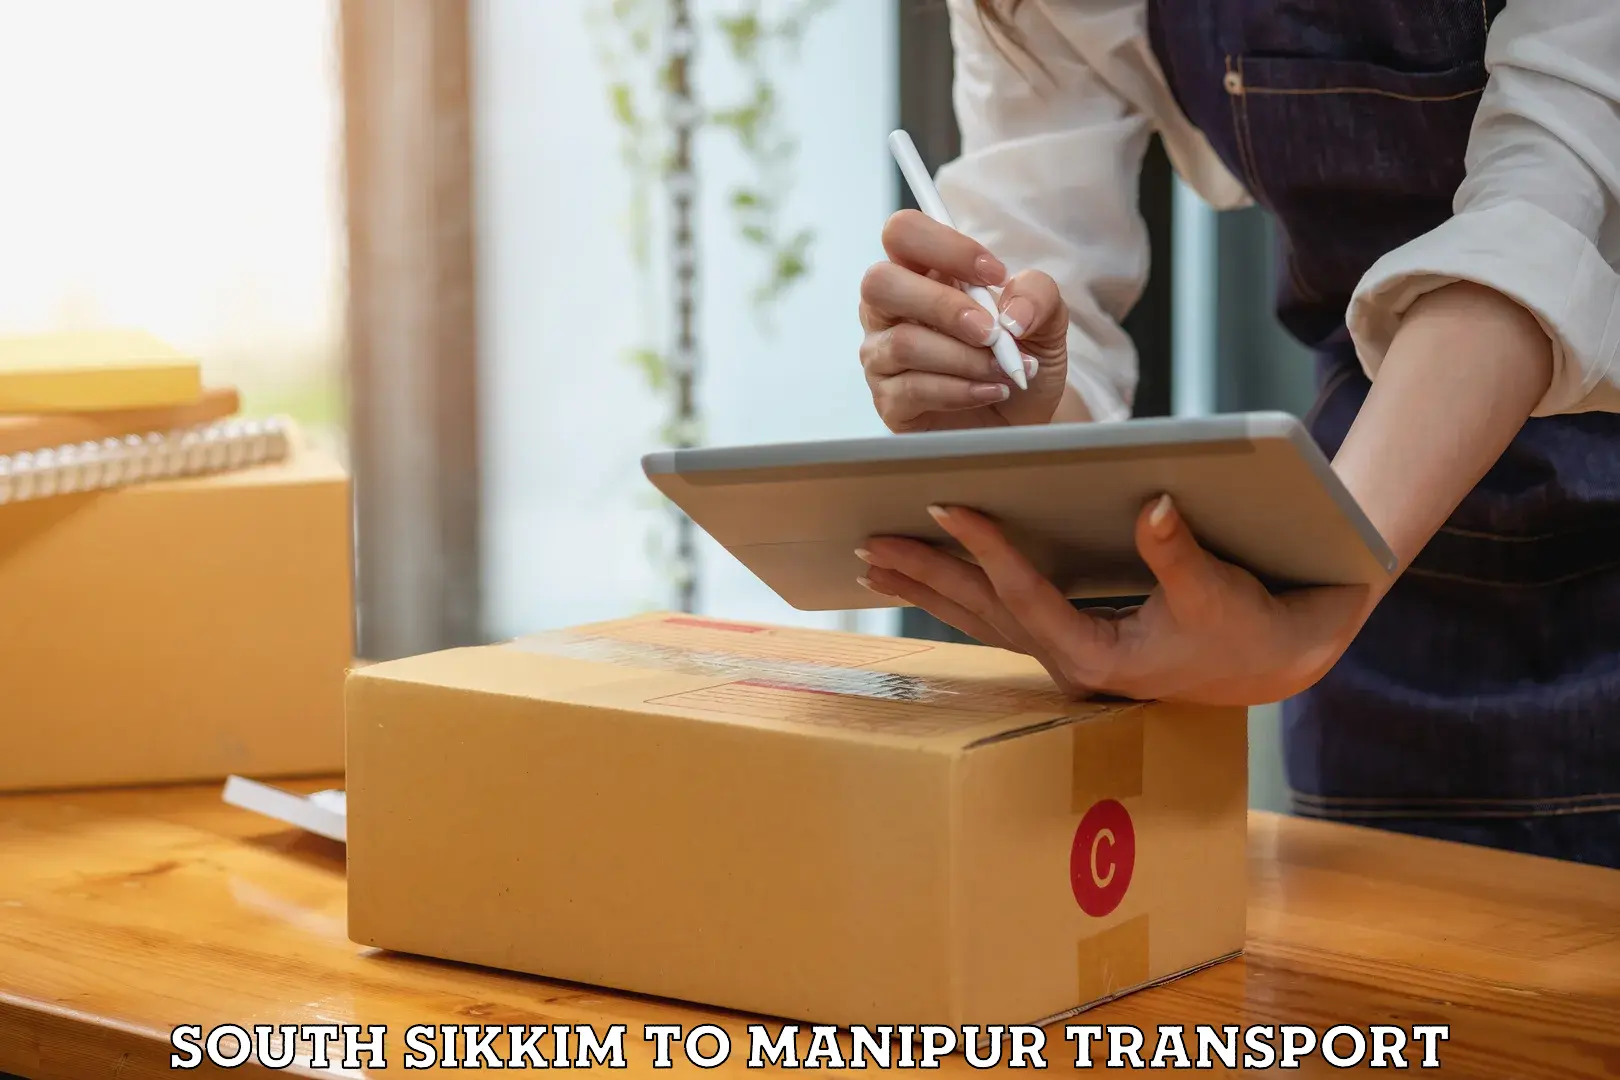 Transport in sharing South Sikkim to Manipur